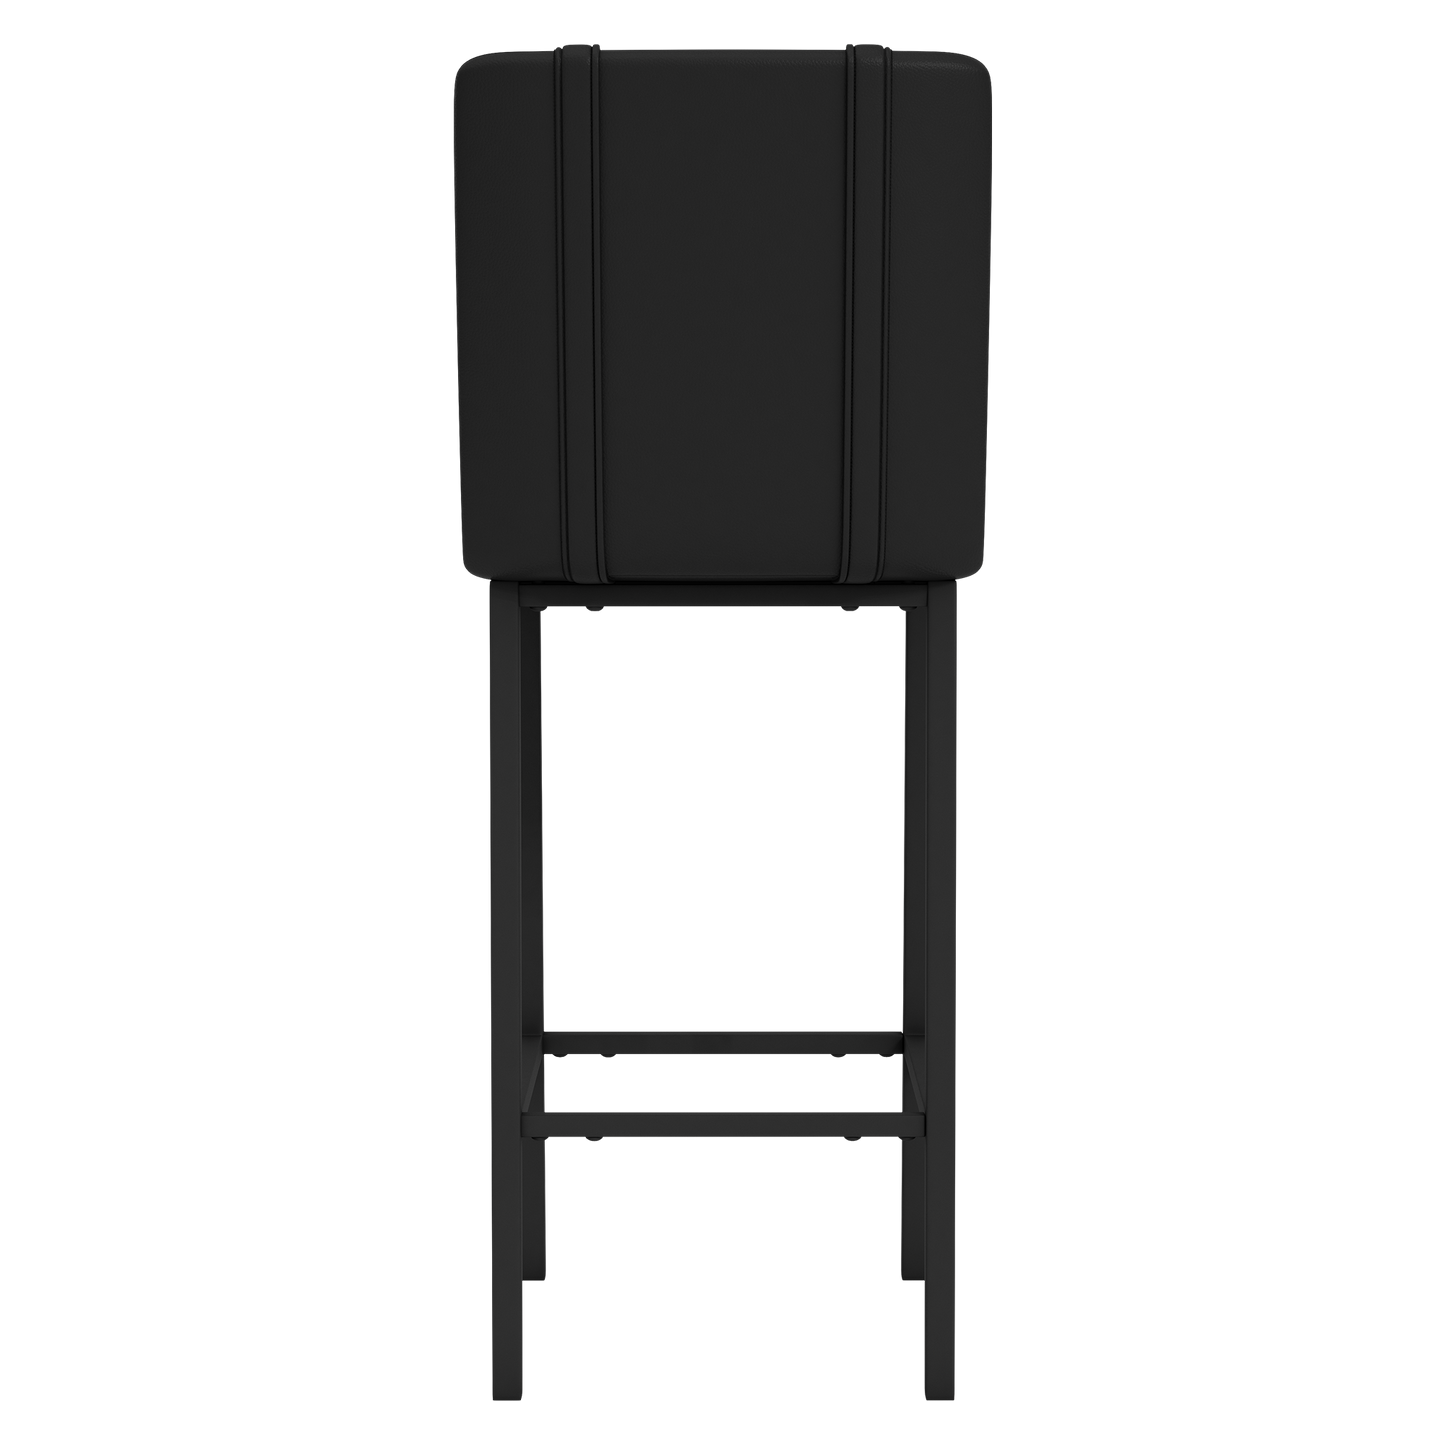 Bar Stool 500 with Cleveland Cavaliers Secondary Logo Set of 2